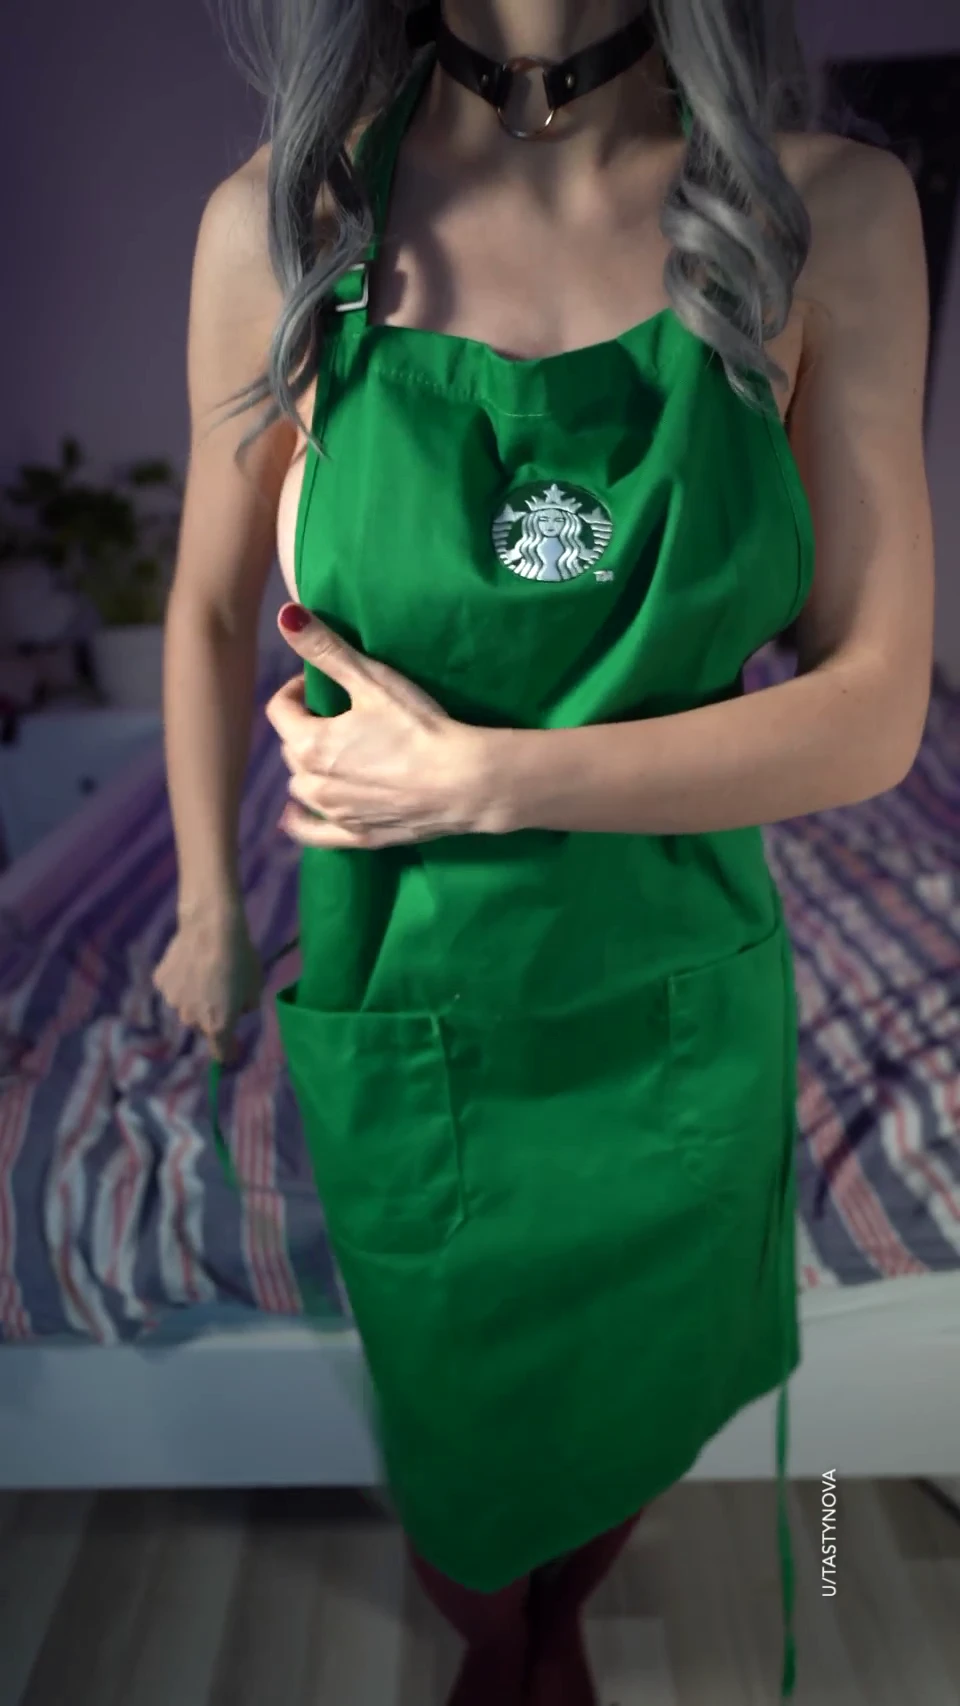 This naughty barista doesn't like wearing clothes at home